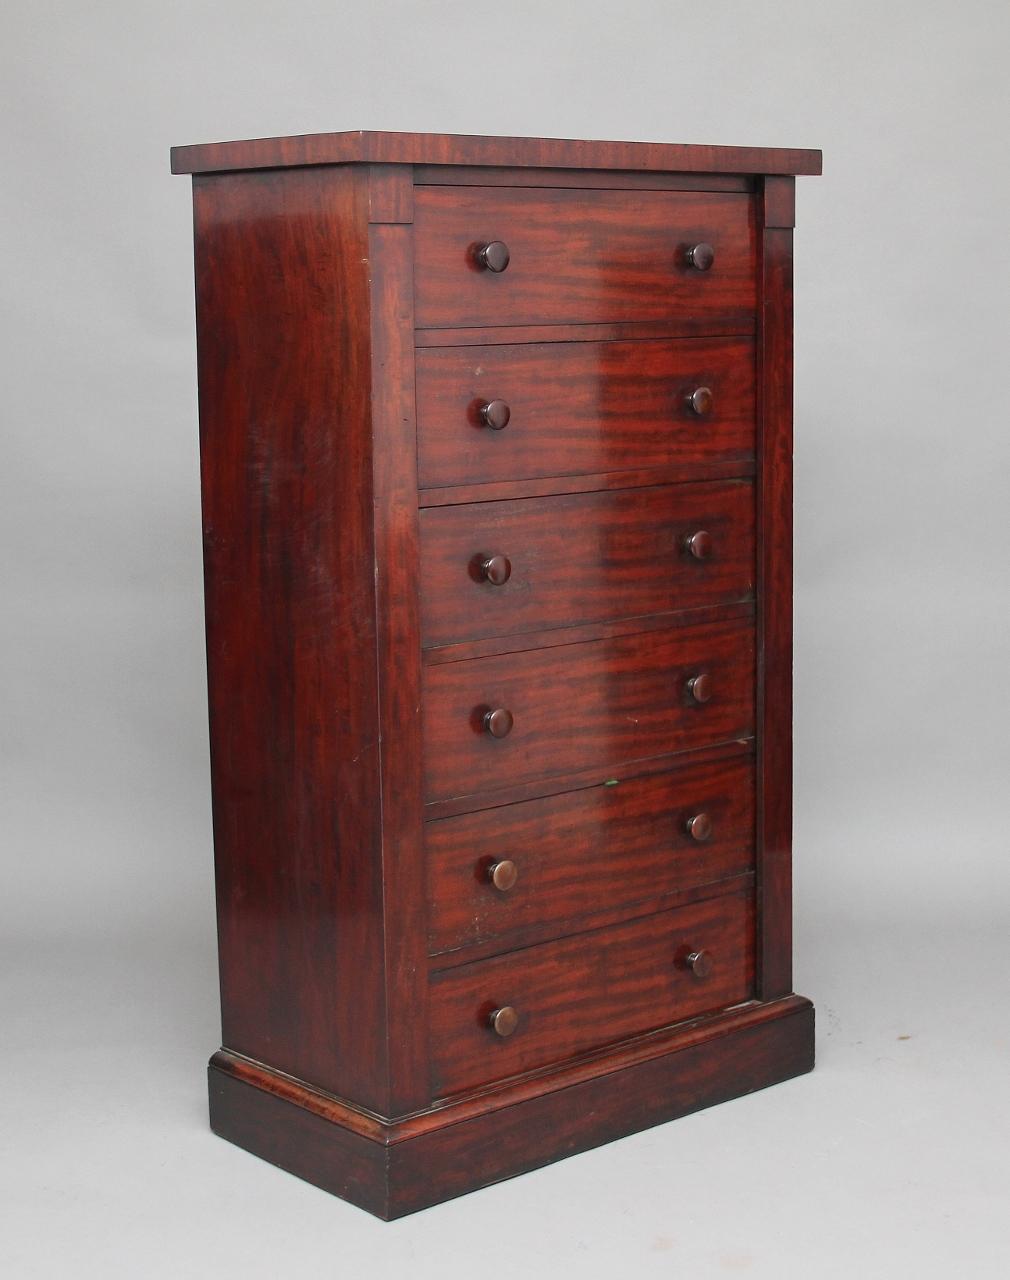 19th century mahogany Wellington chest attributed to Gillows, a lovely rich mahogany color with six mahogany lined drawers with original wooden knobs, the top drawer front drops down to reveal partitions, the other drawers have hinged lids on the